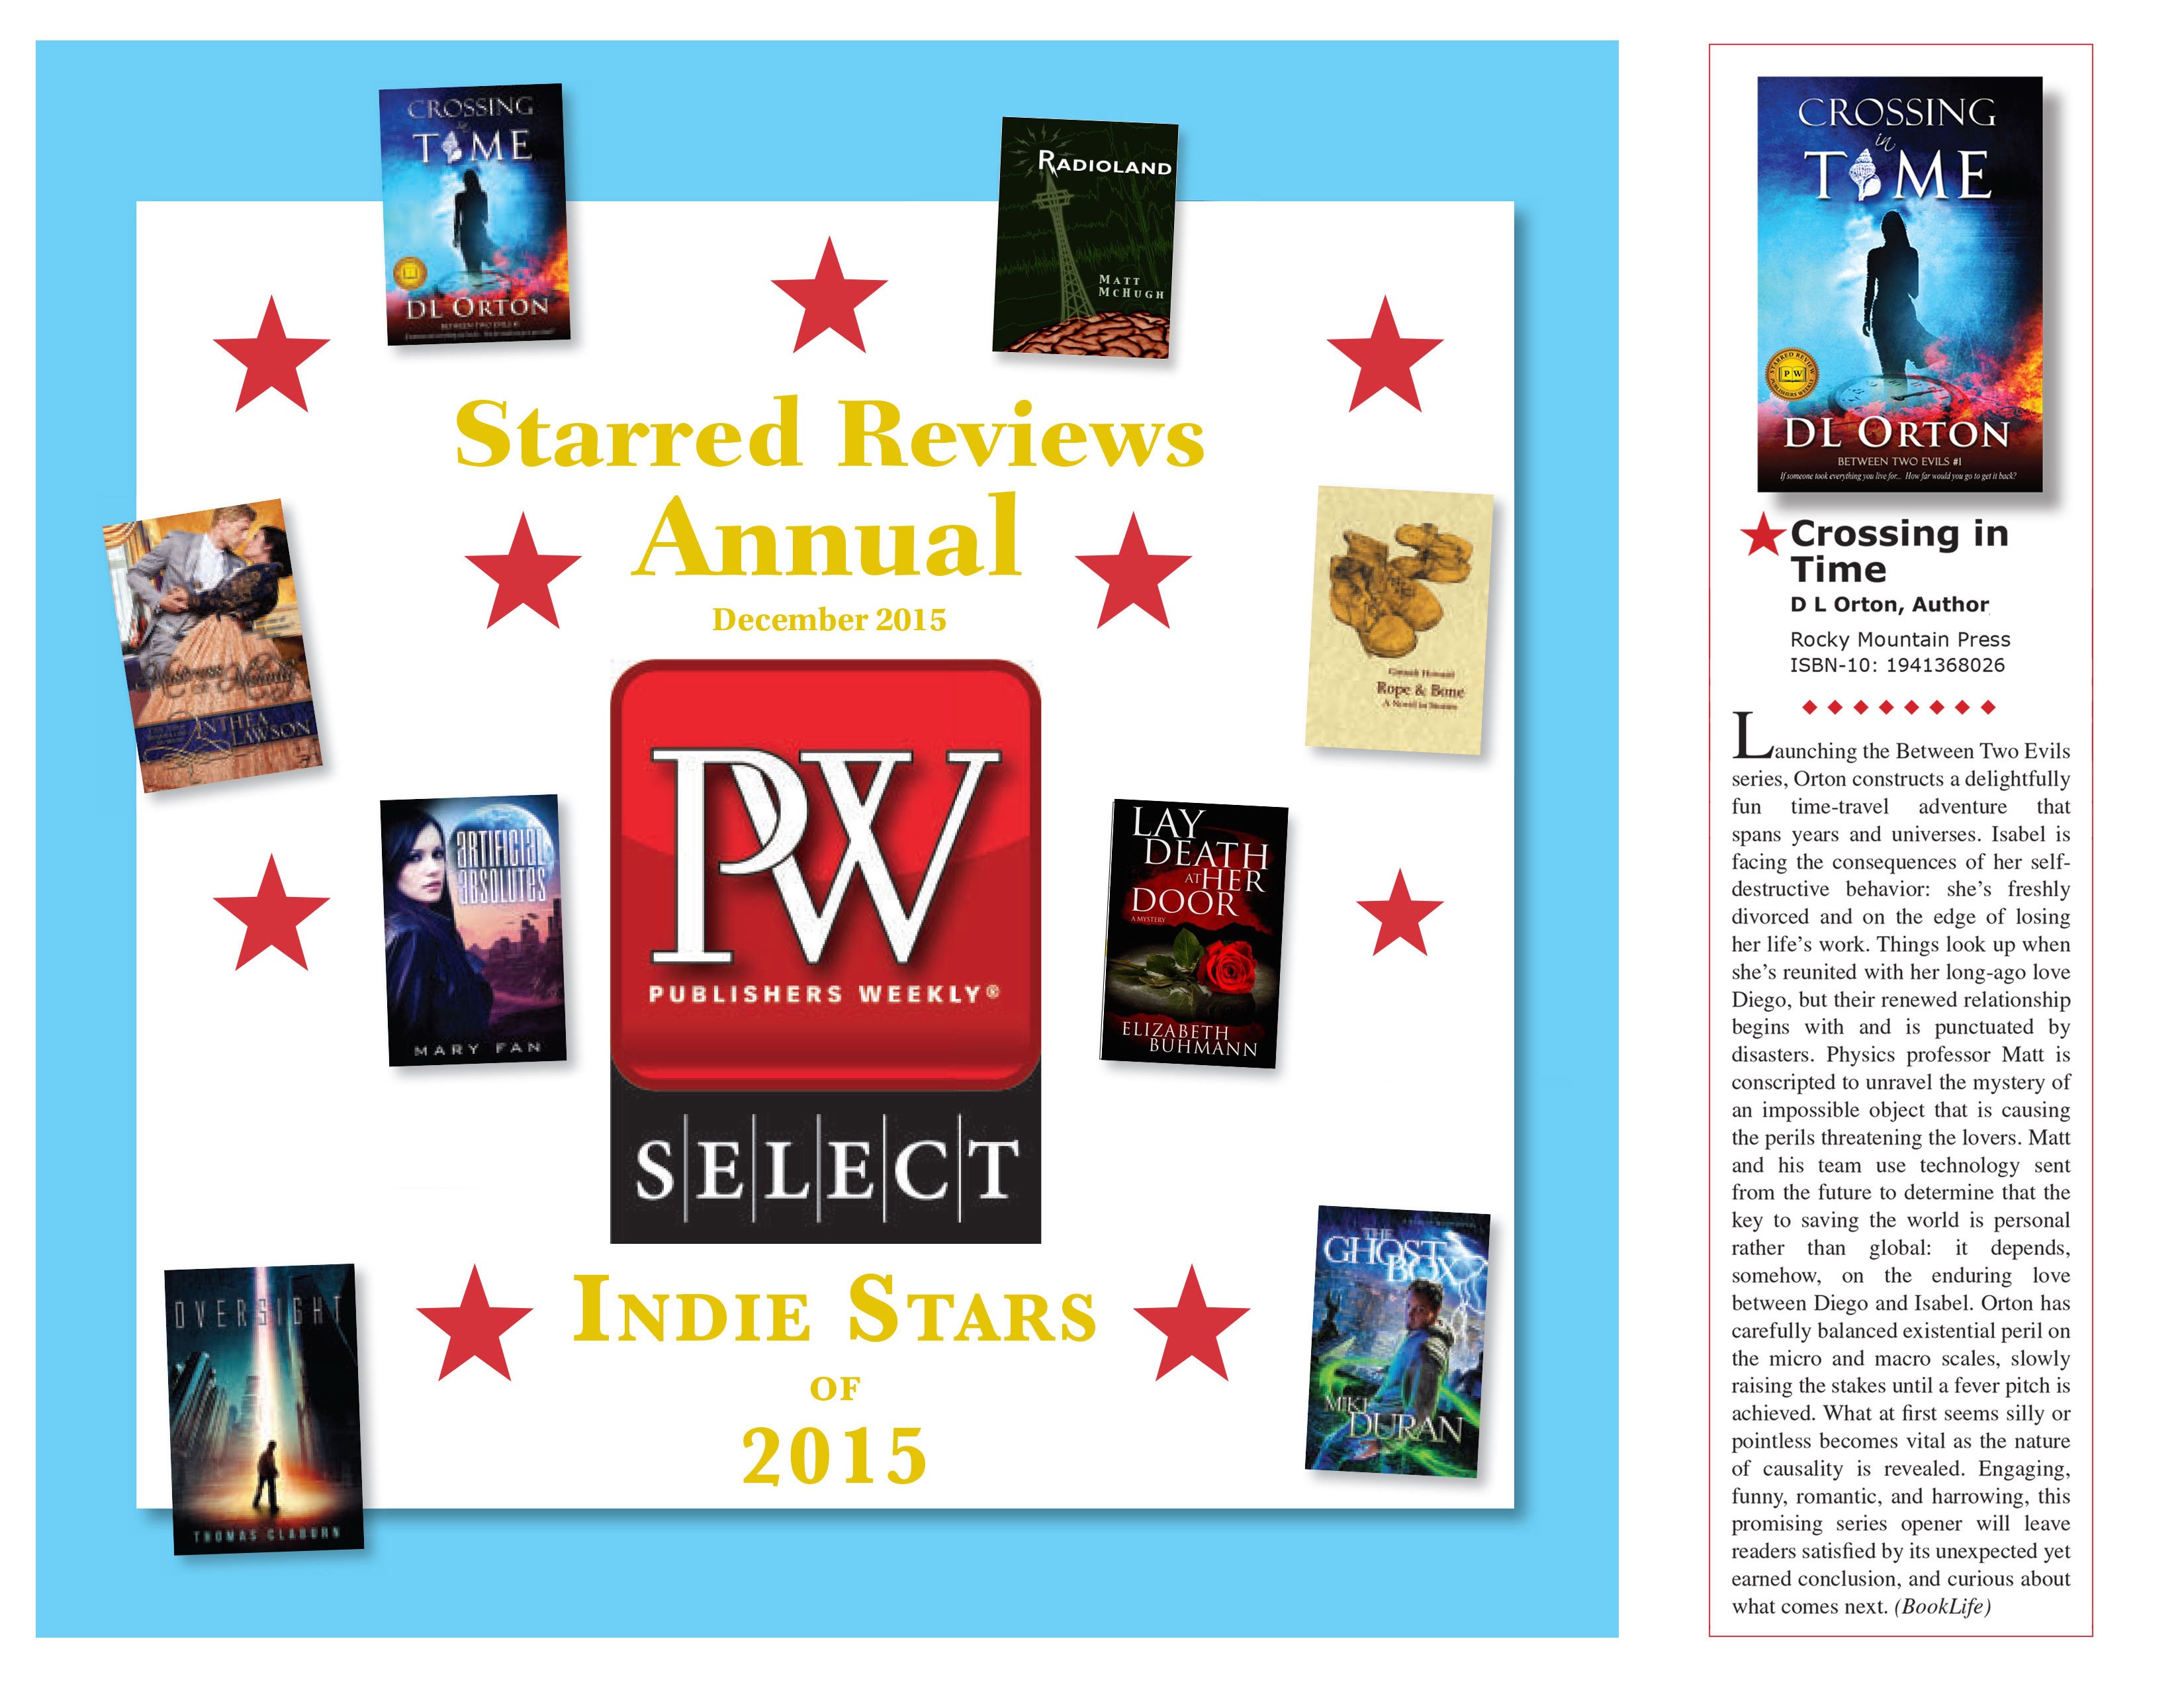 Publishers Weekly: Great Indie Stars!